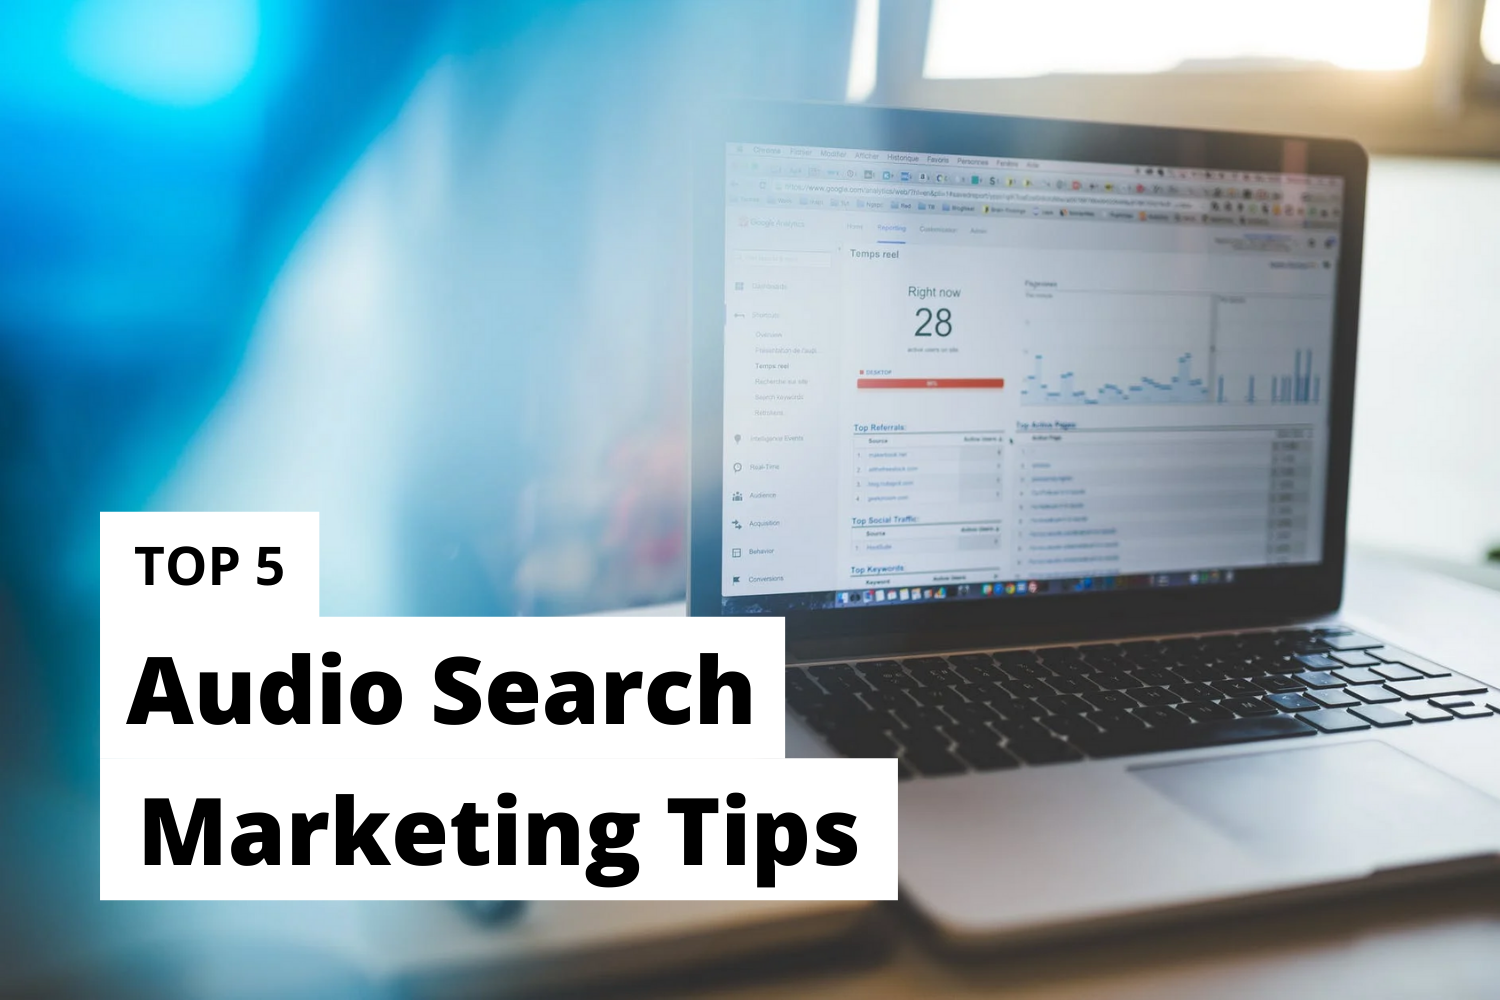 5 Audio Search Marketing Tips